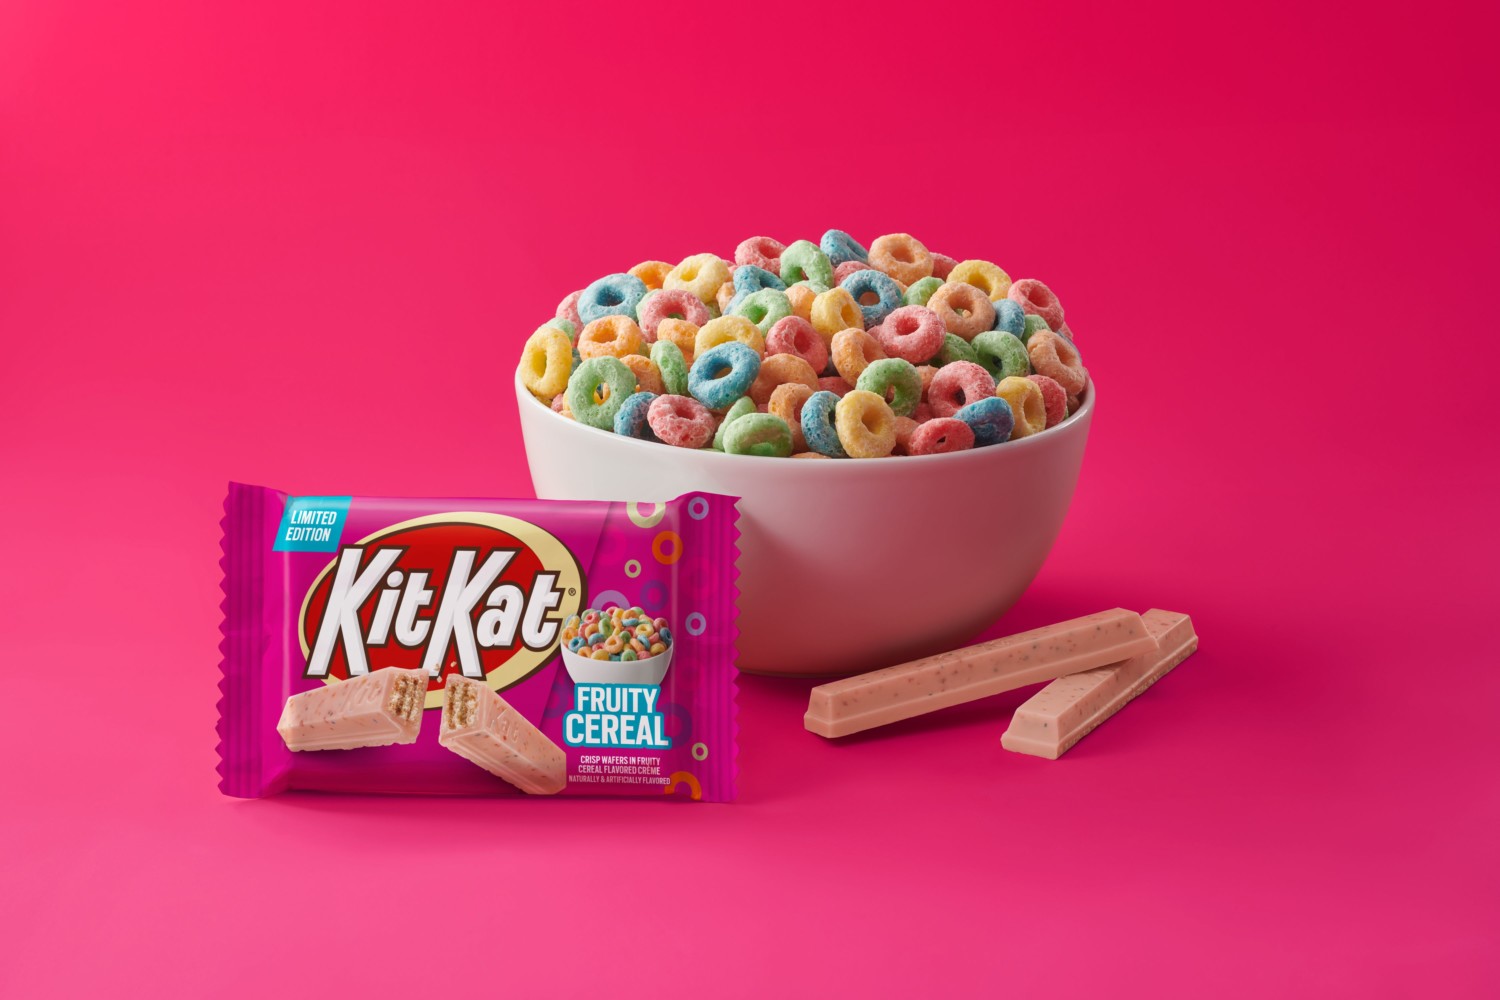 KitKat's new fruity cereal flavor